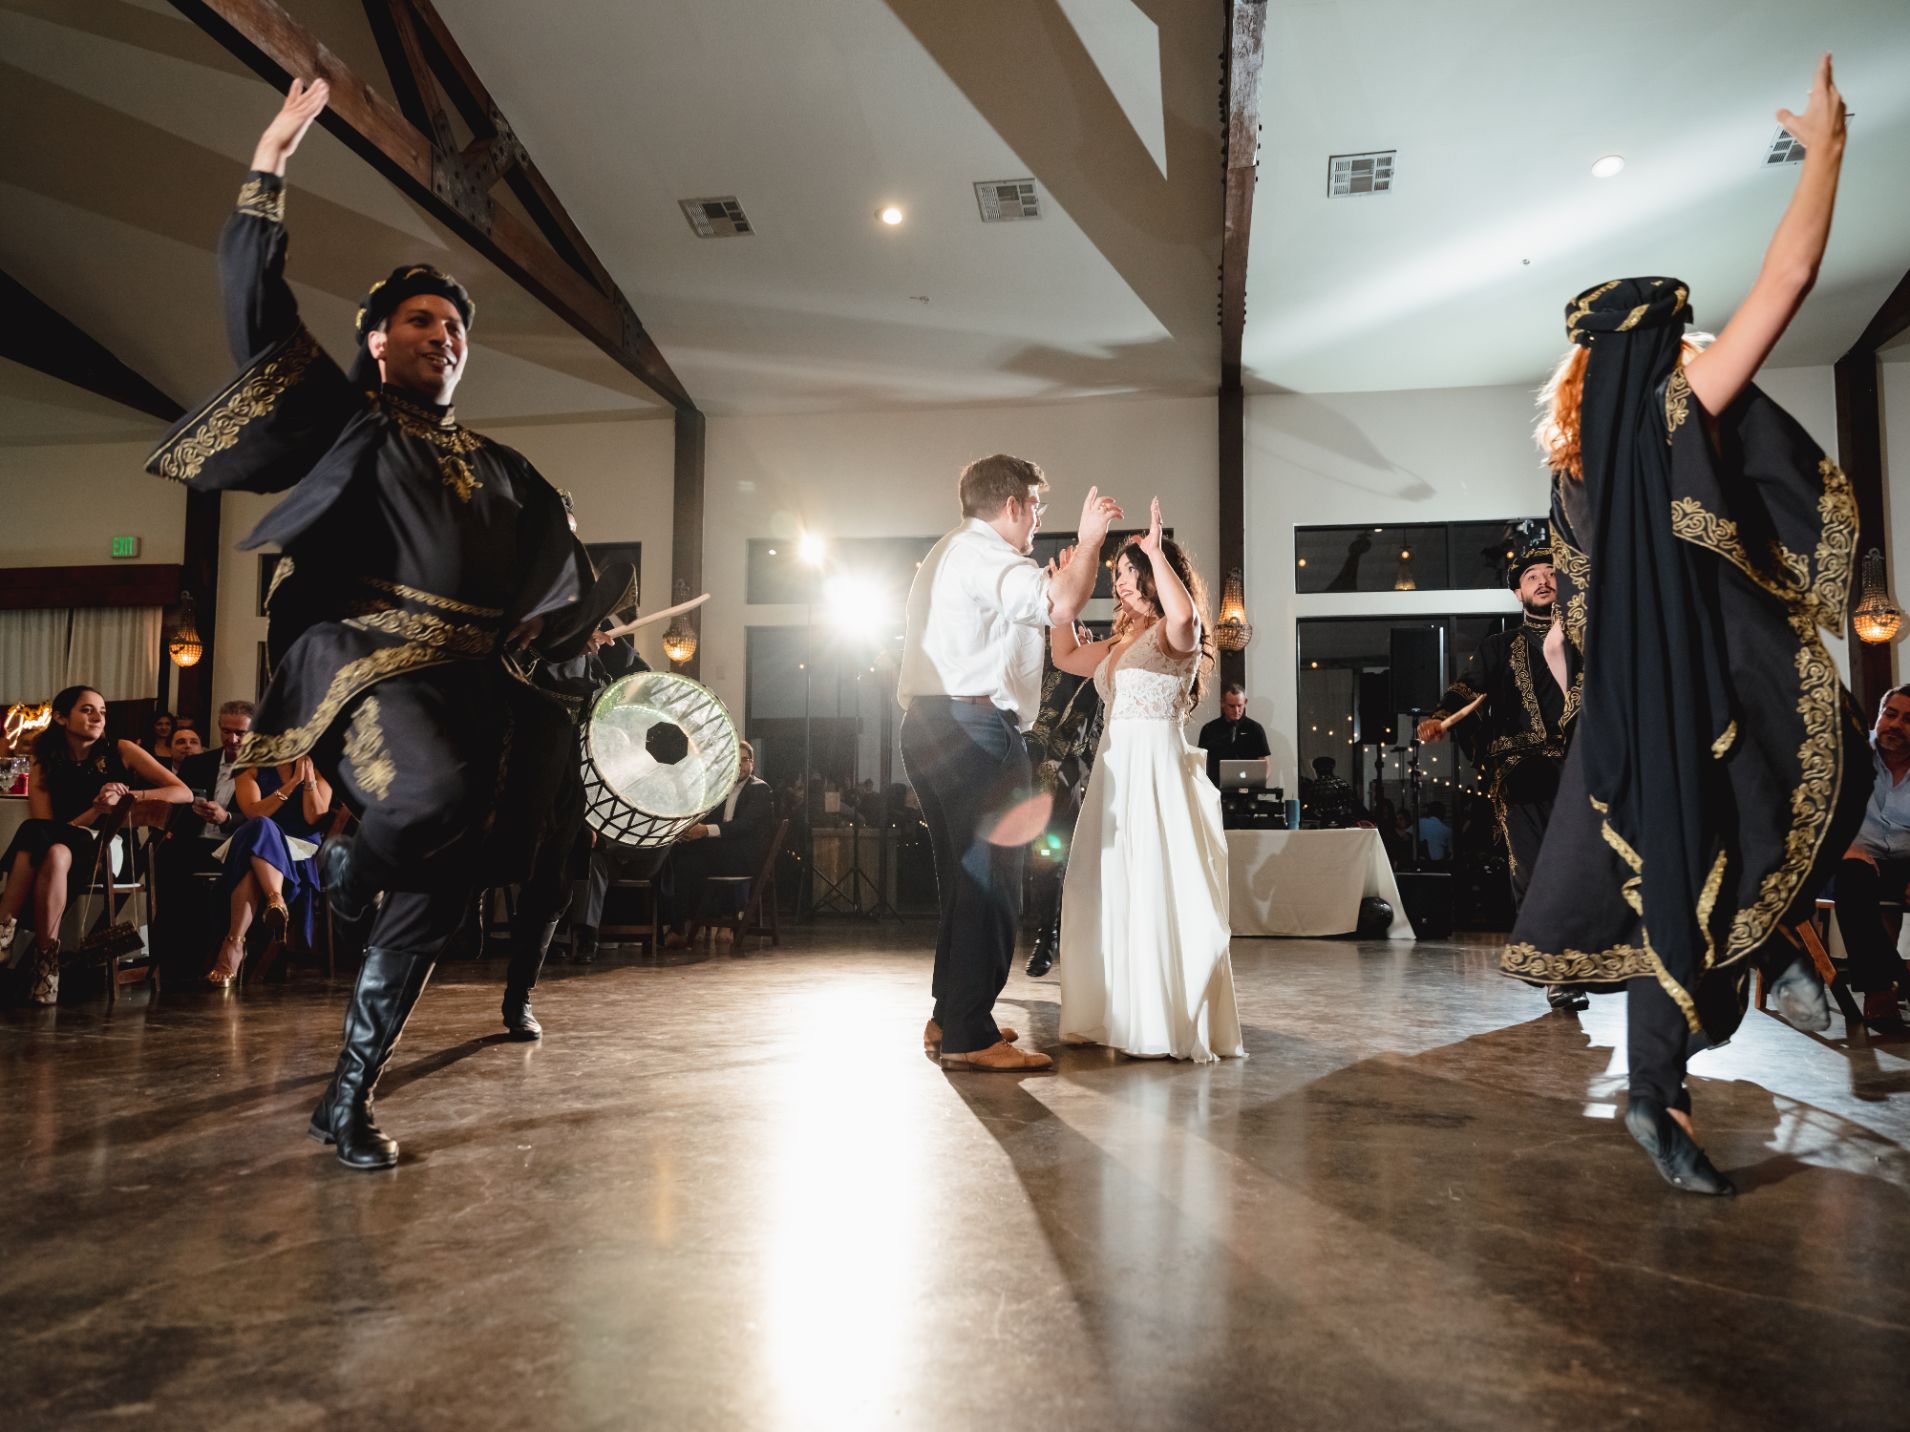 Bride and groom dance as professional dancers with drums dance and play music around them during a wedding reception.